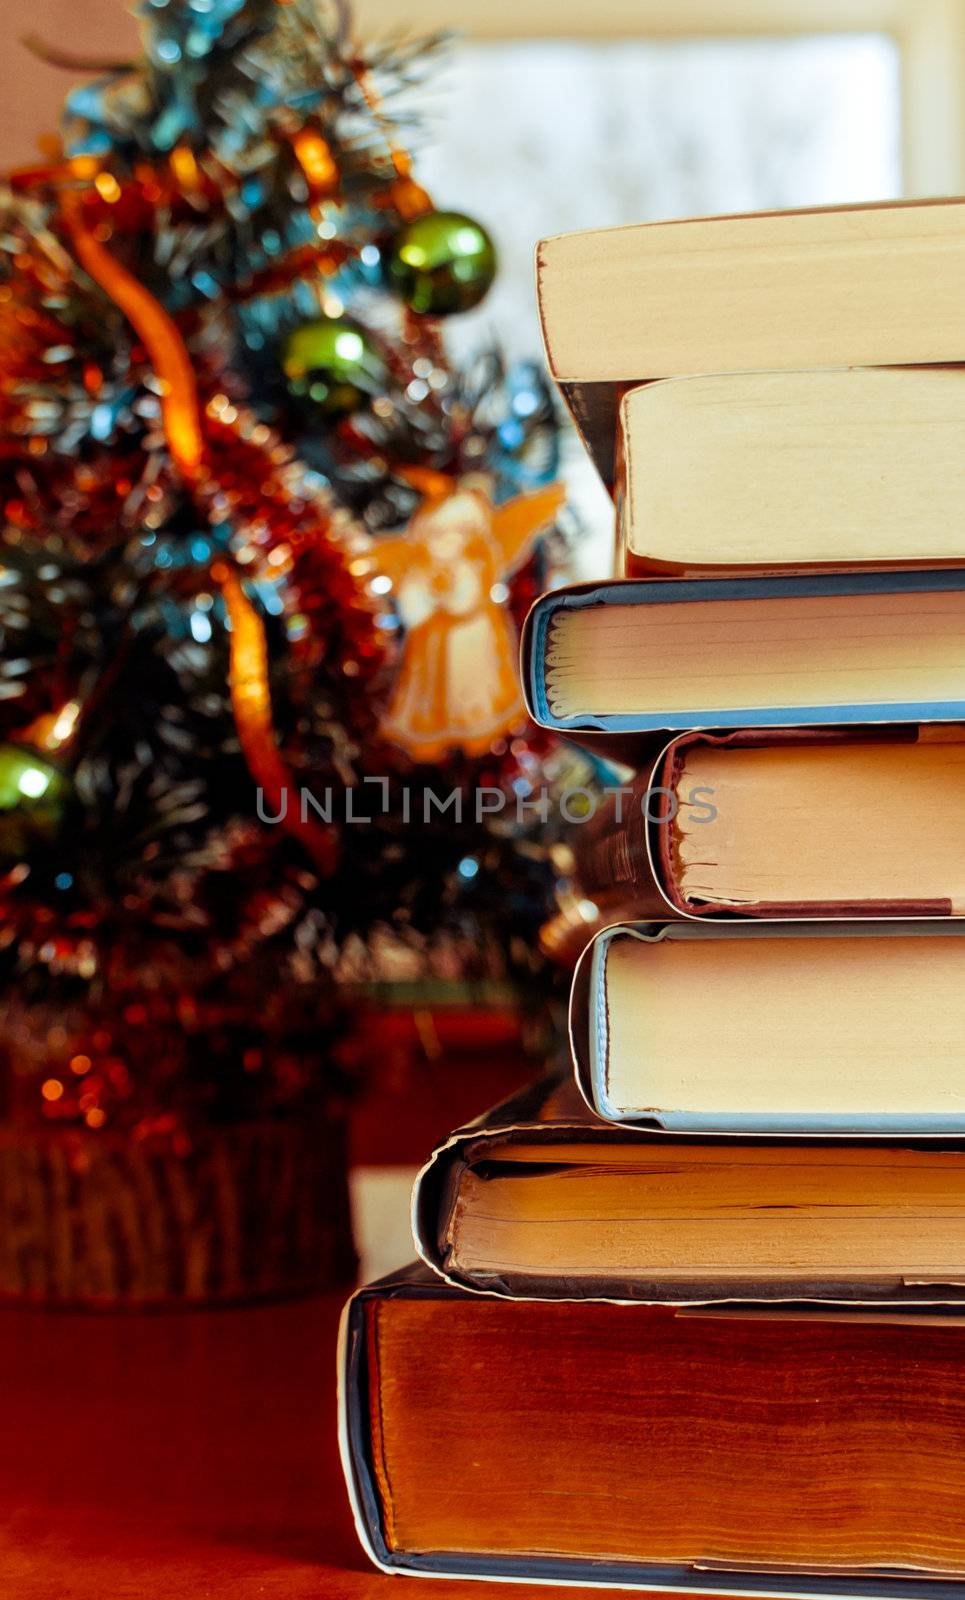 Books laying in front of Chrismas tree by AndreyKr